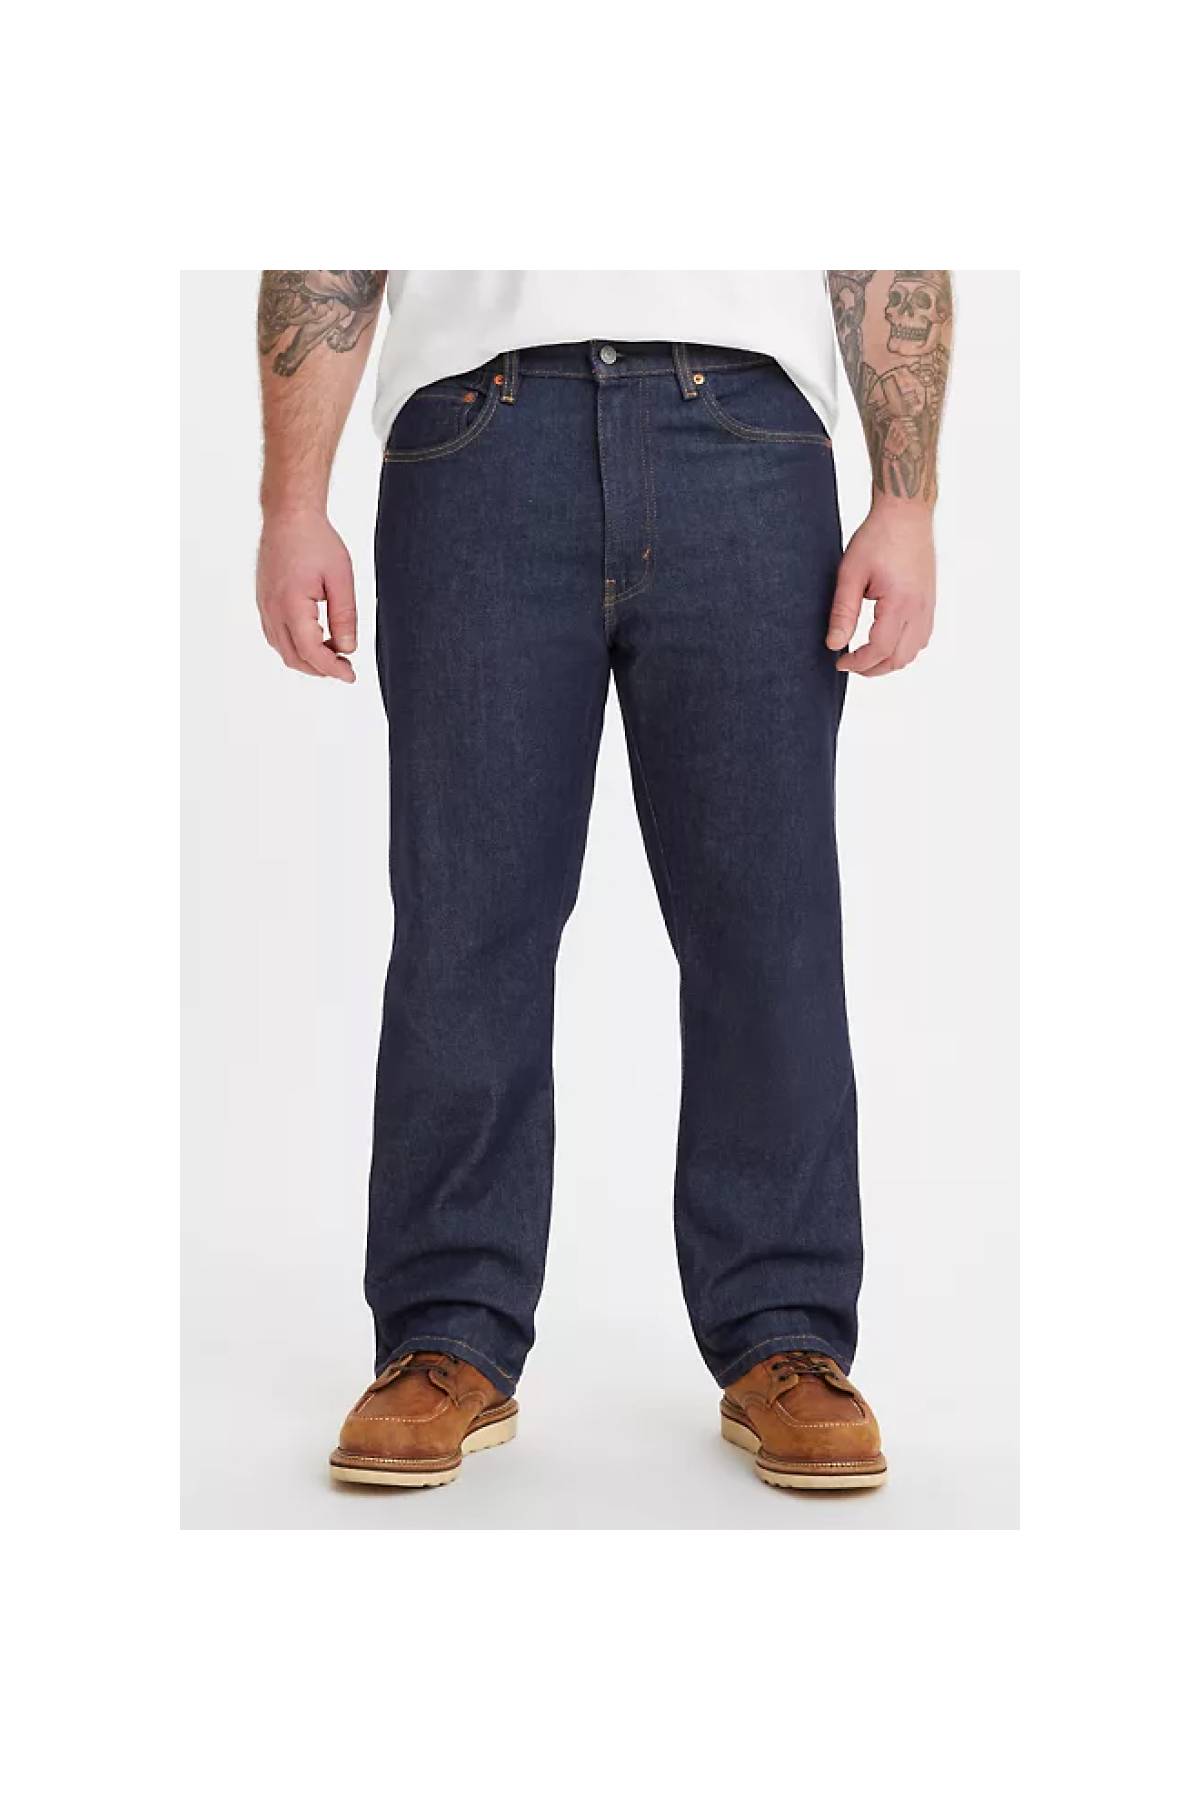 Mens Pants & Jeans Fit Guide, All Mens Collection